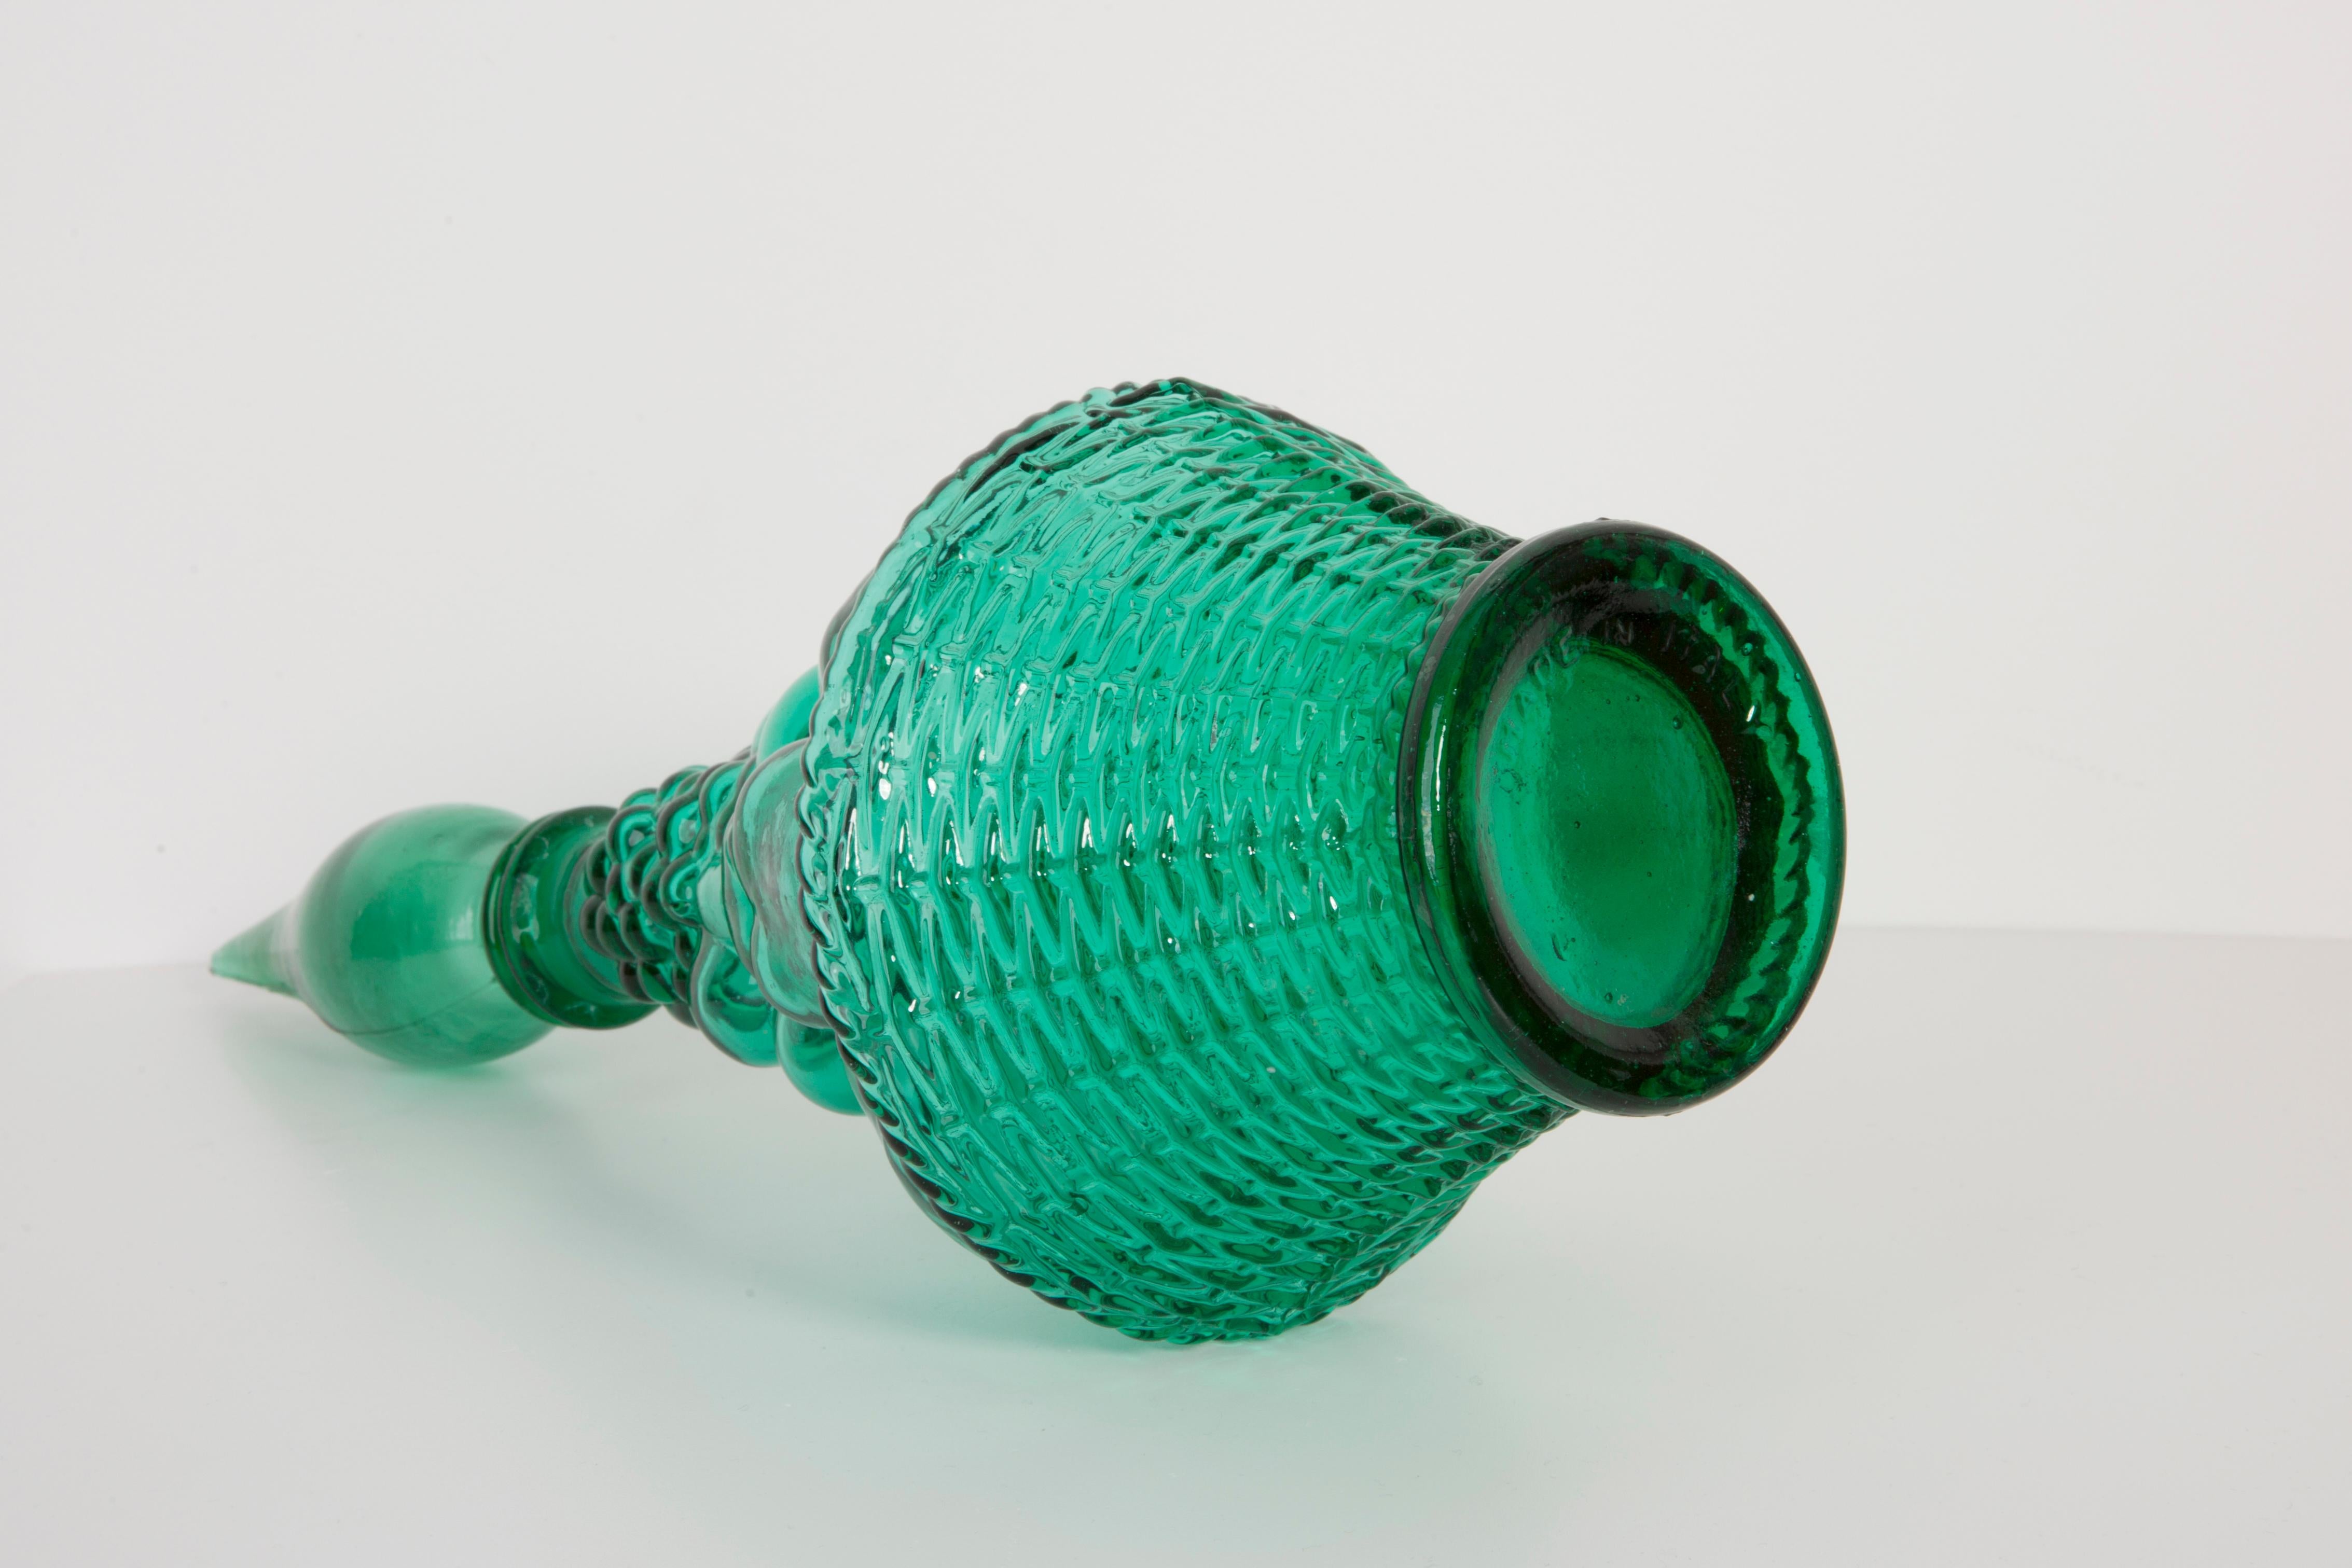 A stunning green glass decanter with geometric design, made by one of the many glass manufacturers based in the region of Empoli, Italy. Has 